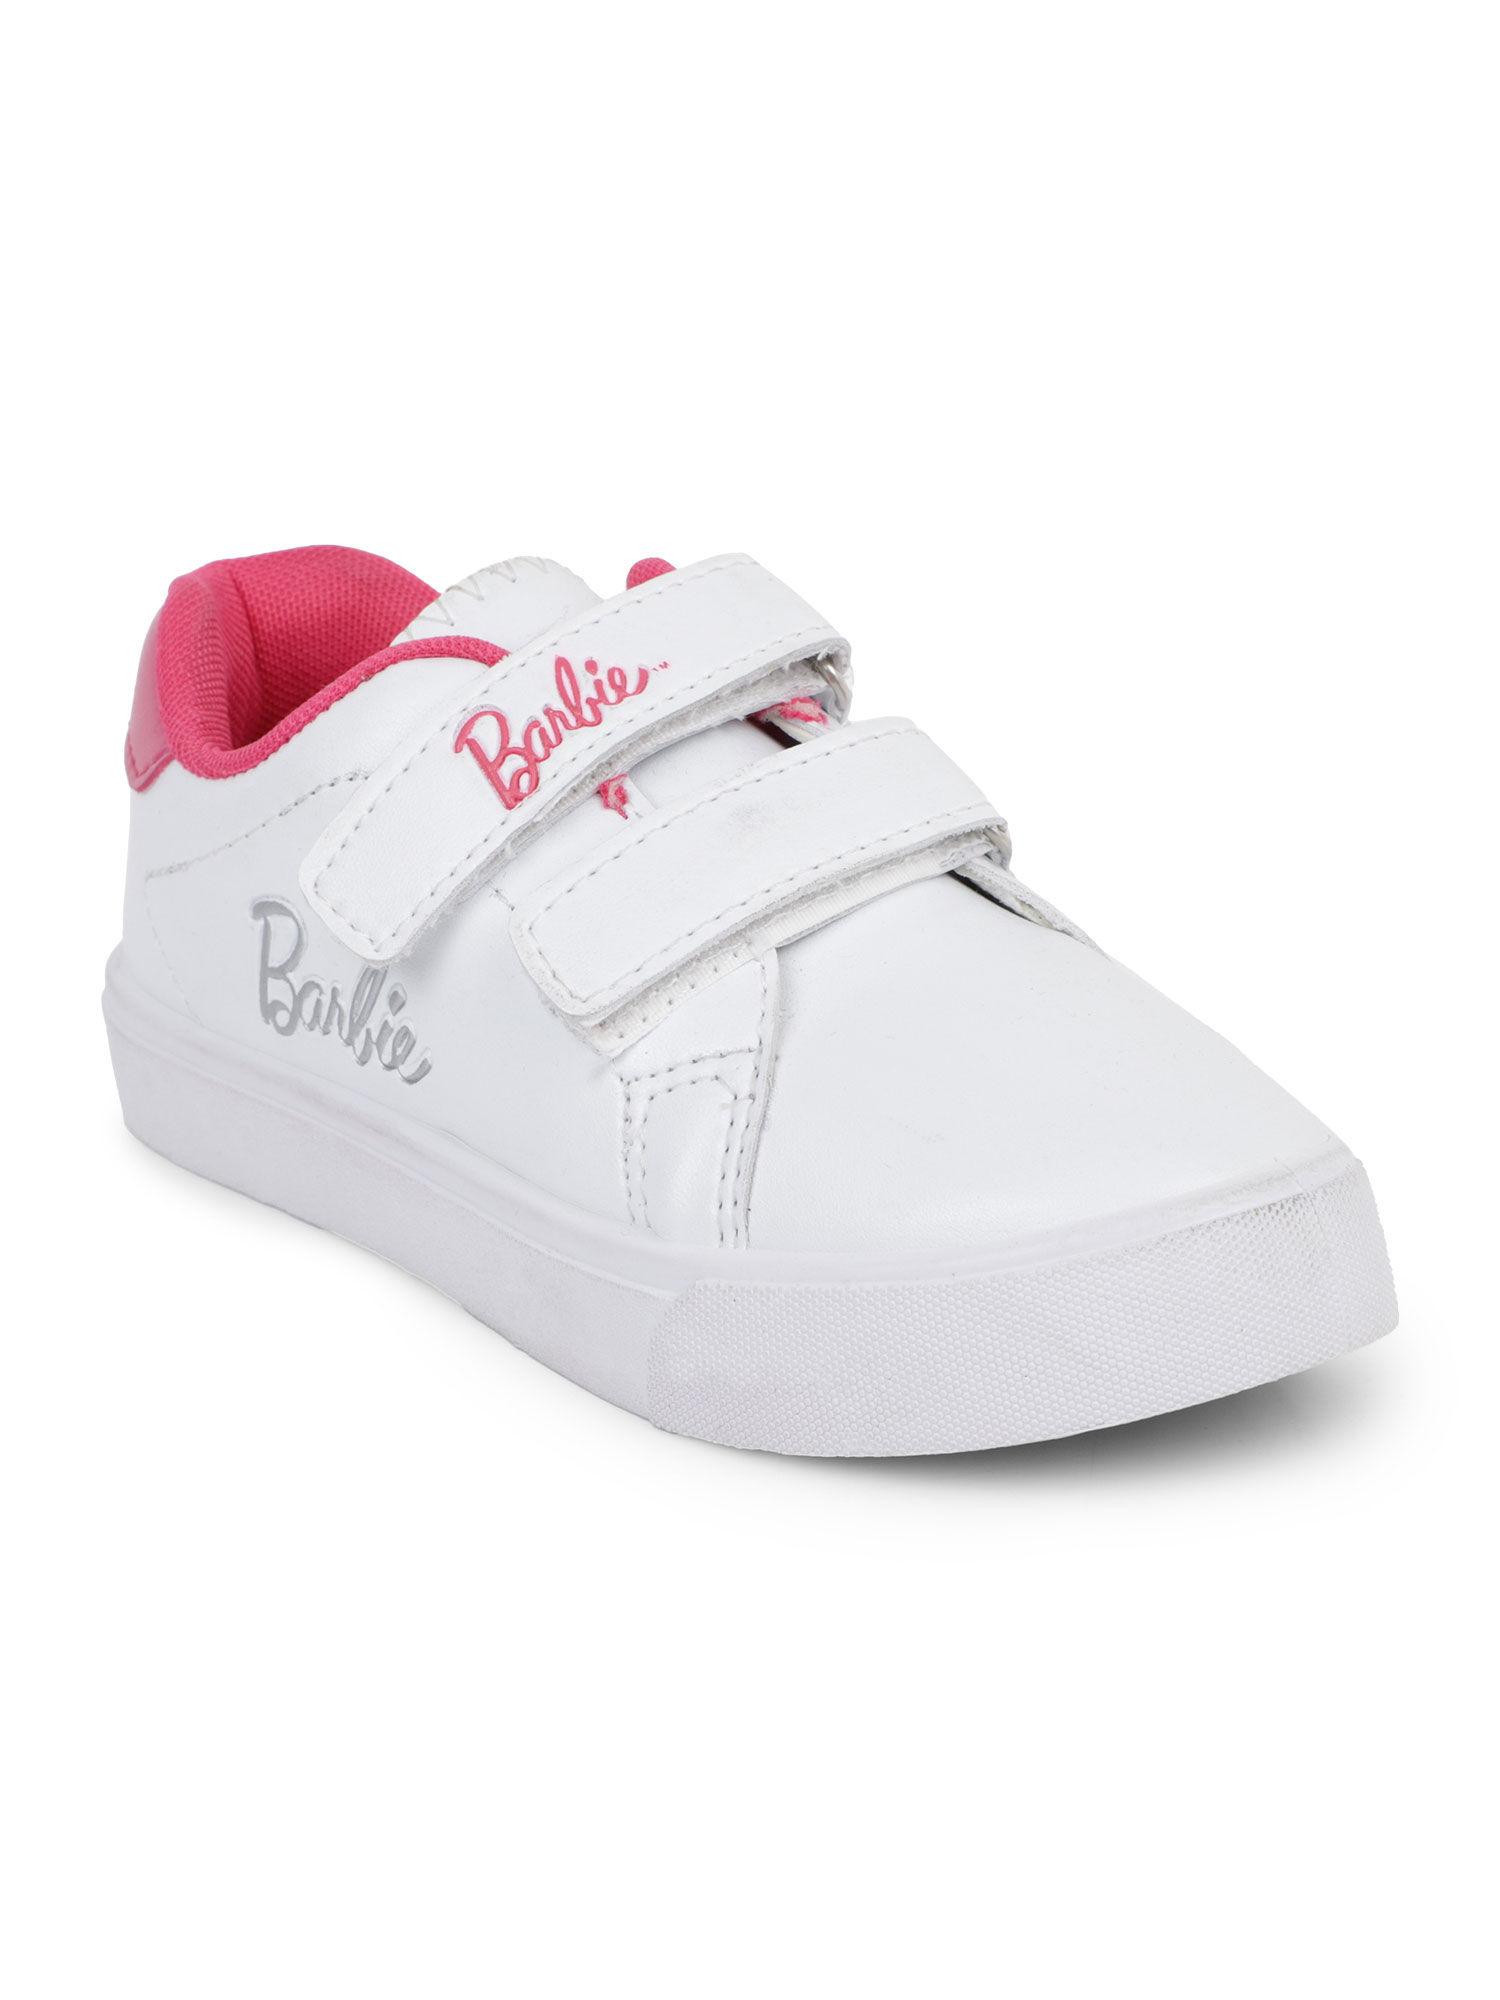 white color barbie printed shoes for girls